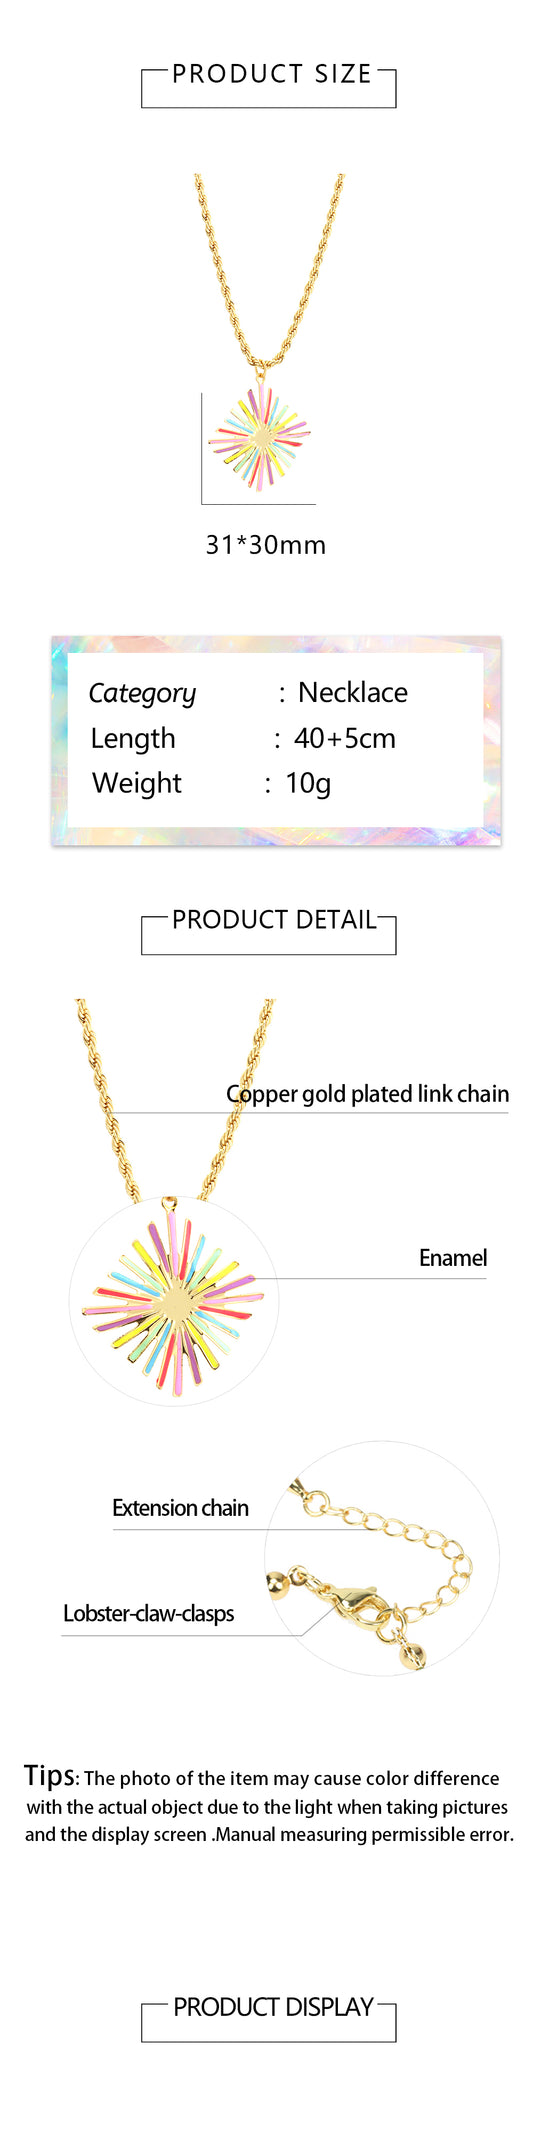 Simple Style Artistic Flower Copper 18k Gold Plated Pendant Necklace In Bulk